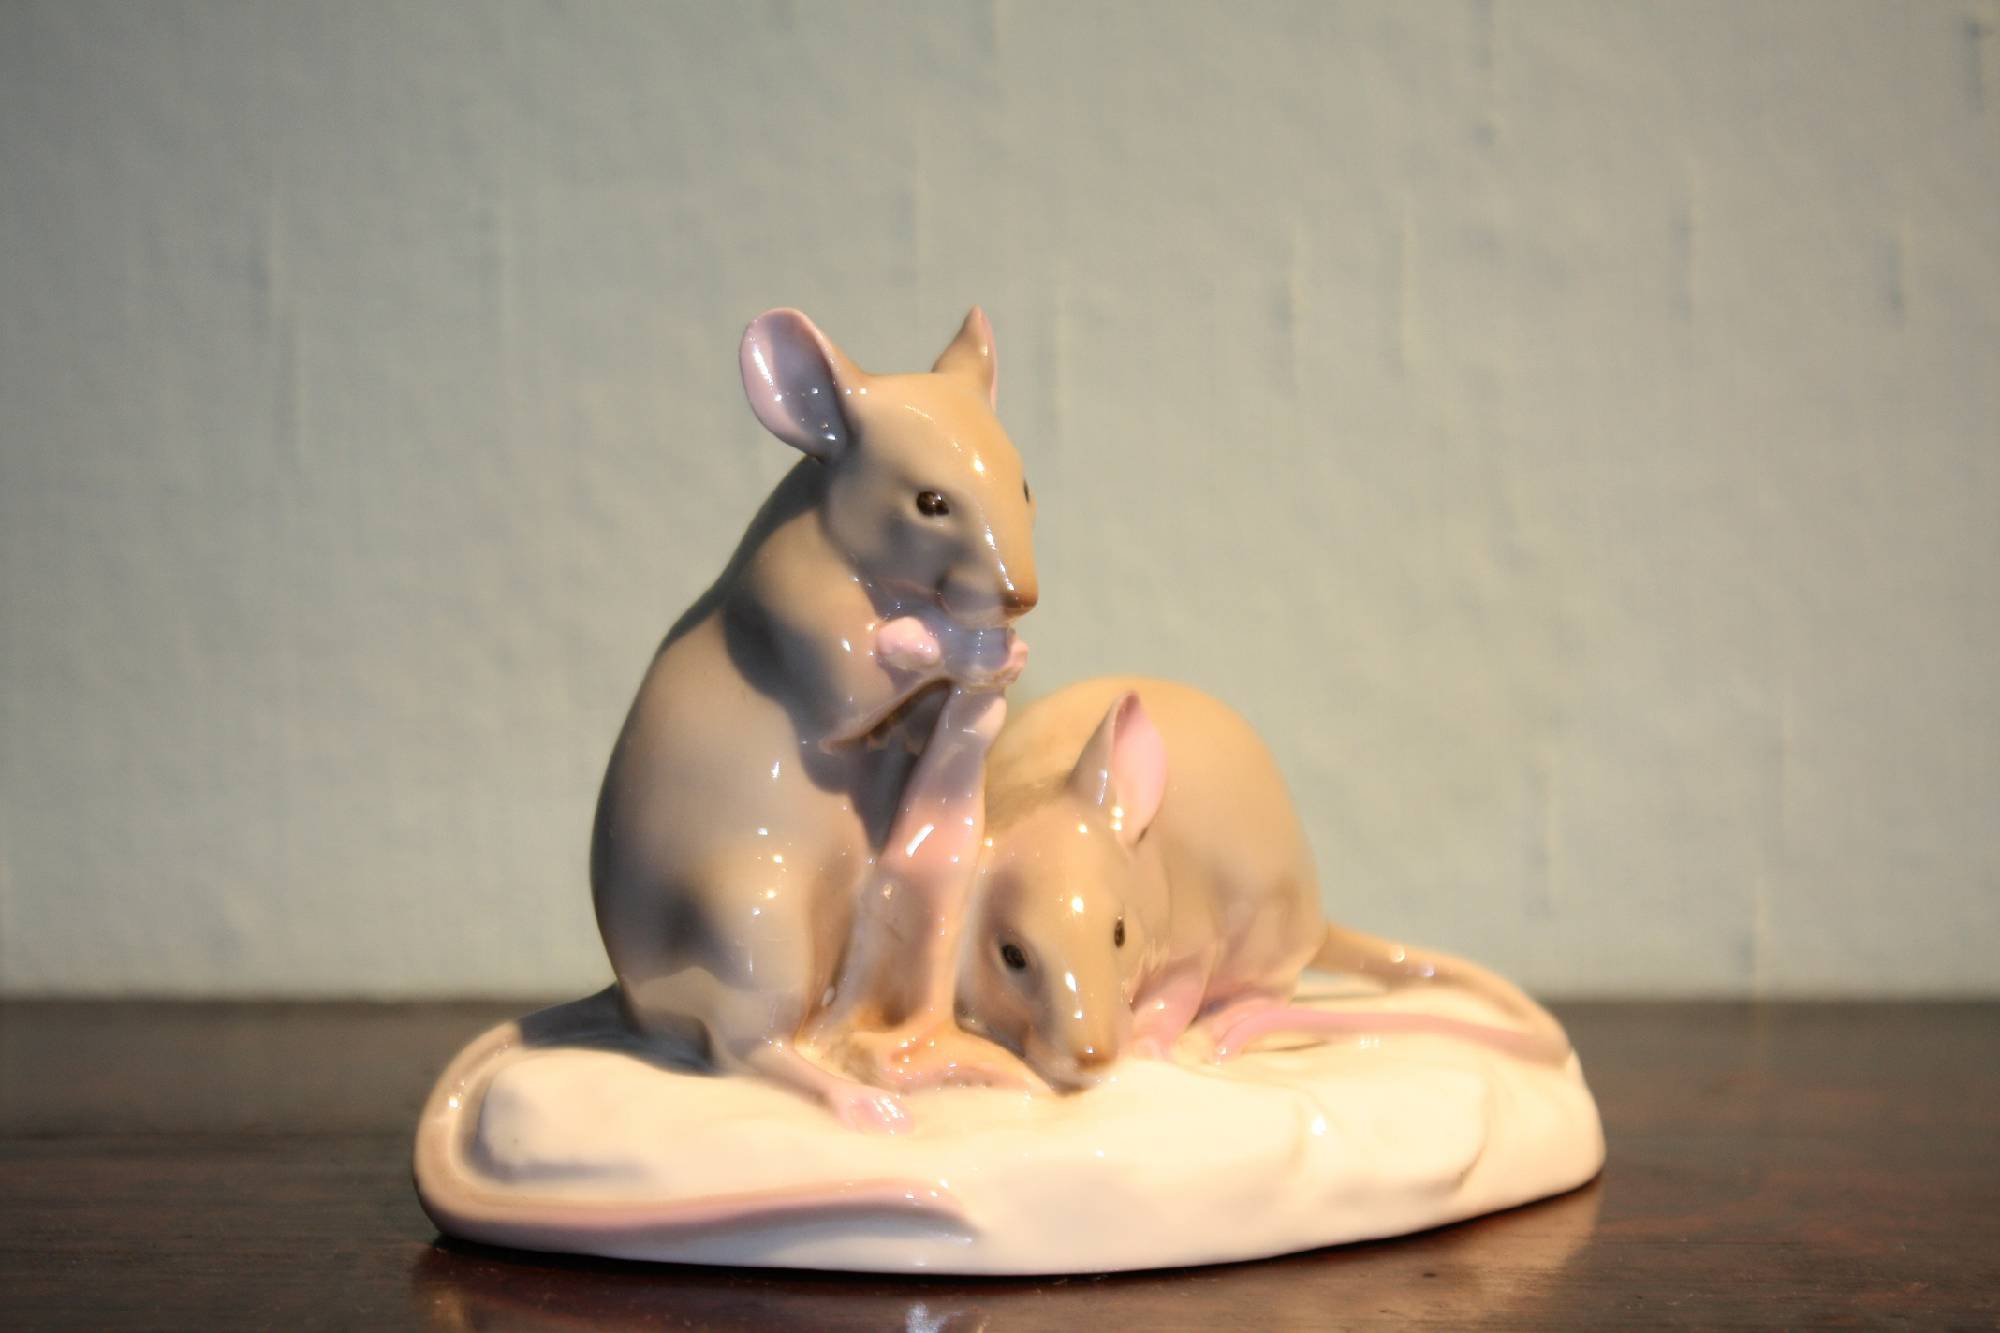 A small rare 1910 hand-painted porcelain figure of two mice eating bacon, signed by Nymphenburg